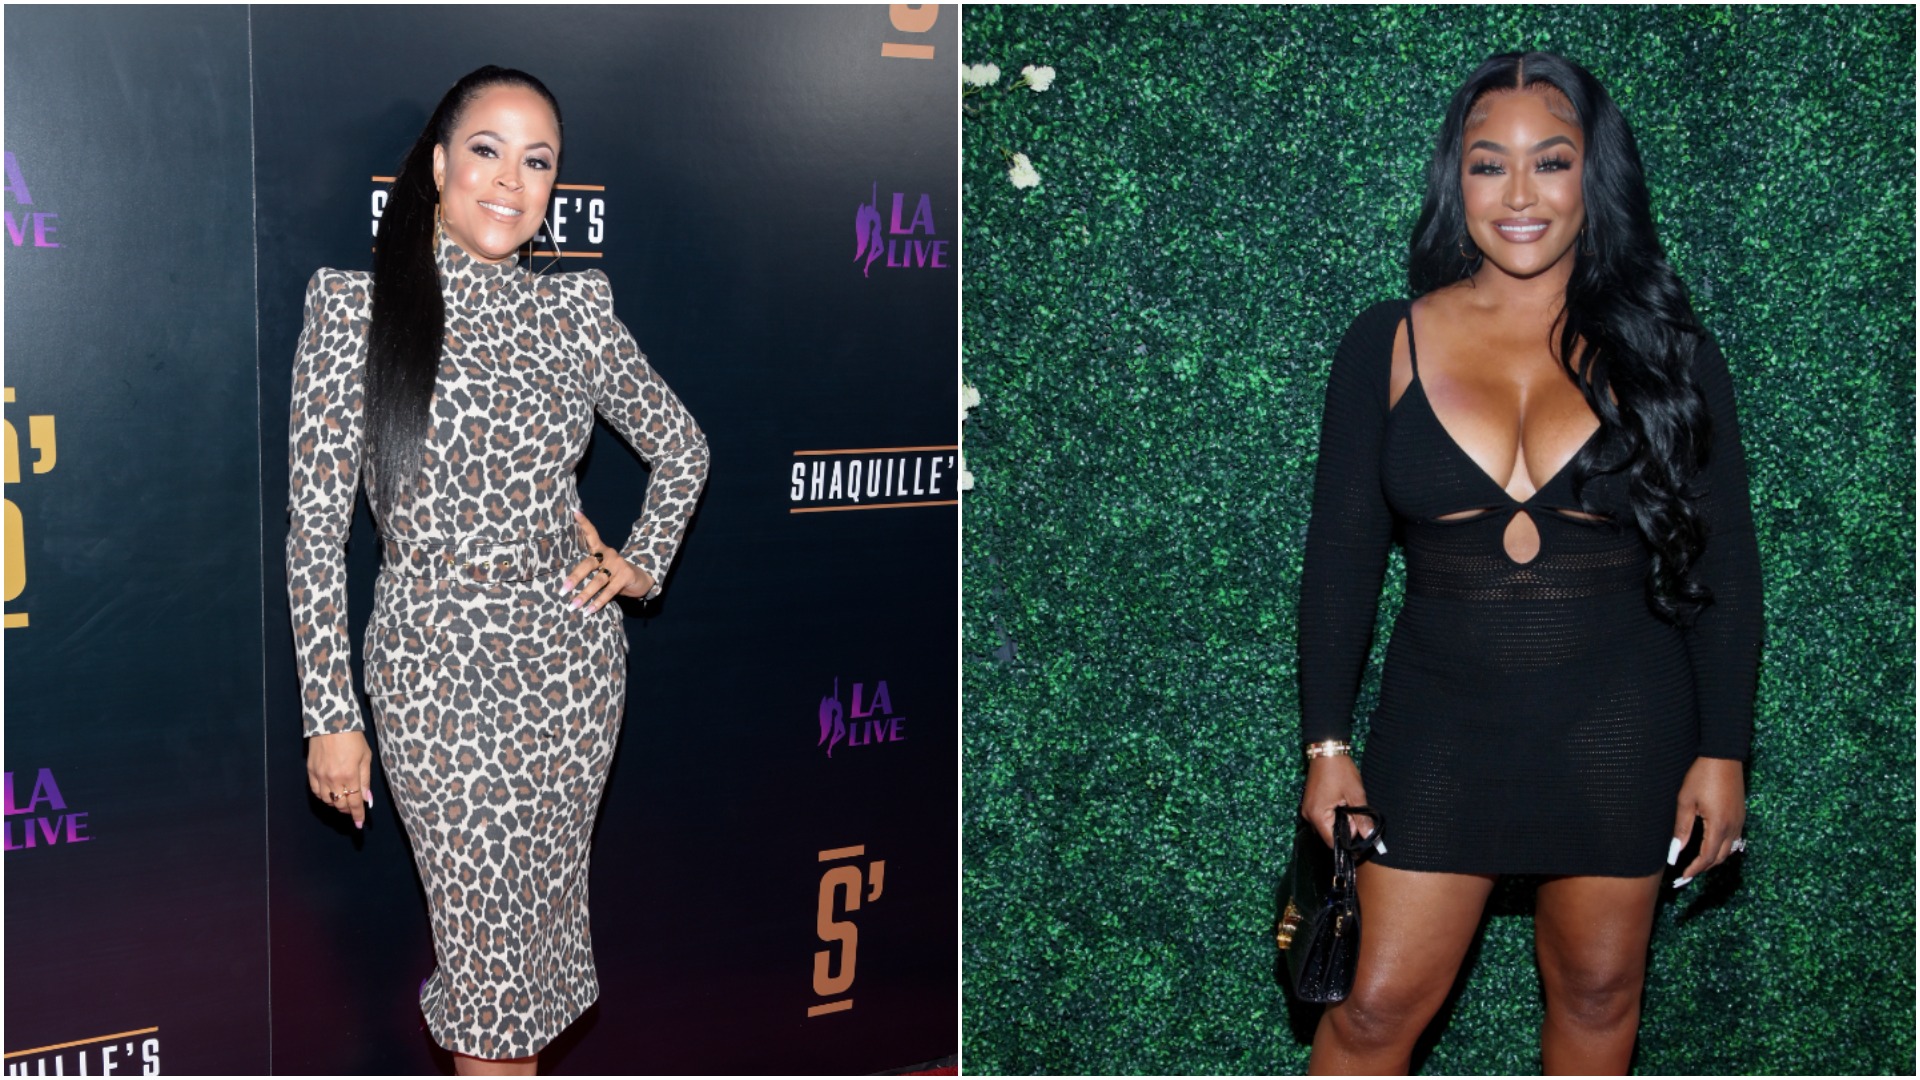 Shaunie O'Neal and Brandi Maxiell attend red carpet events separately and smile for cameras